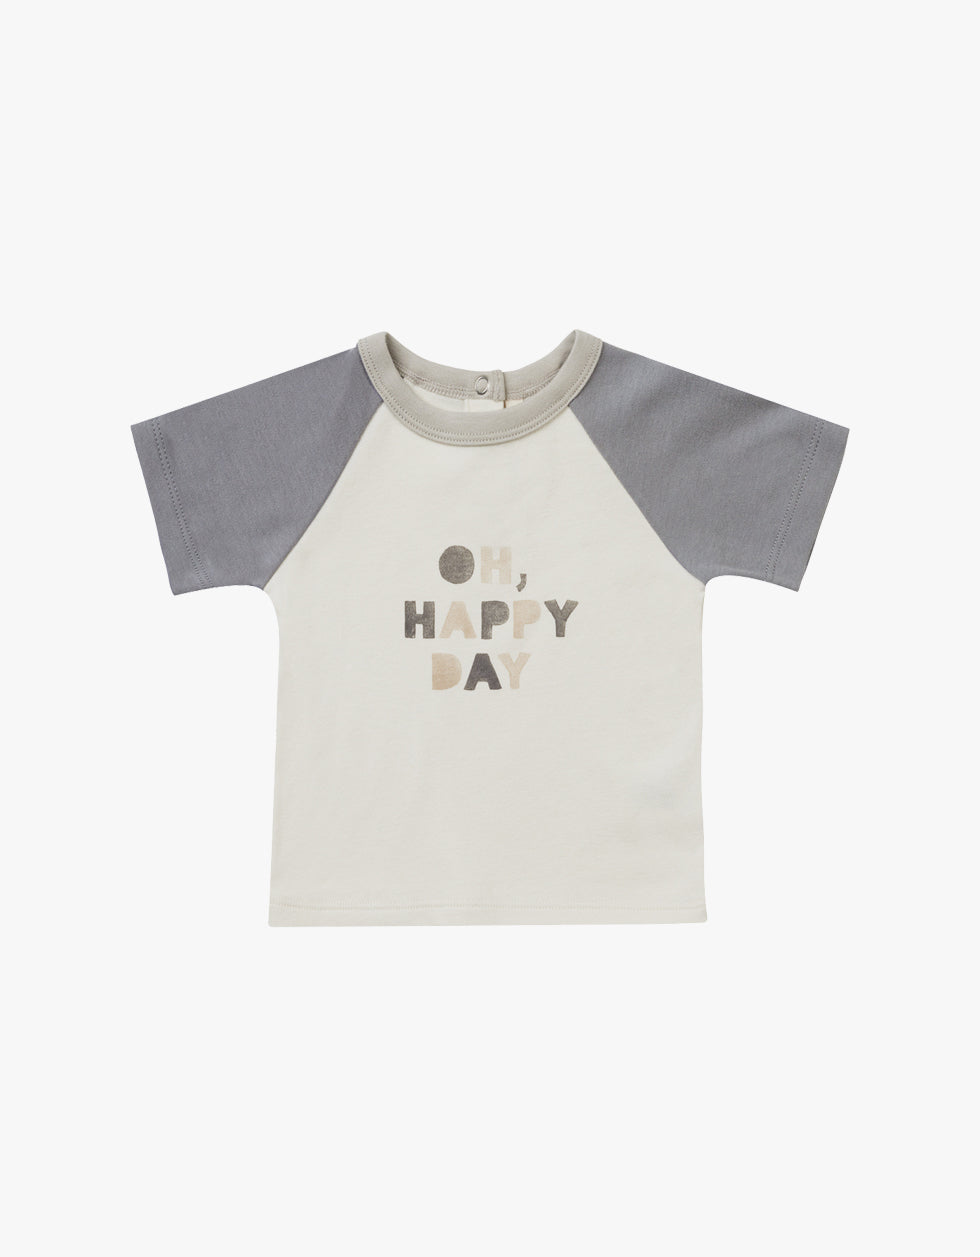 T-shirt | Oh, happy day